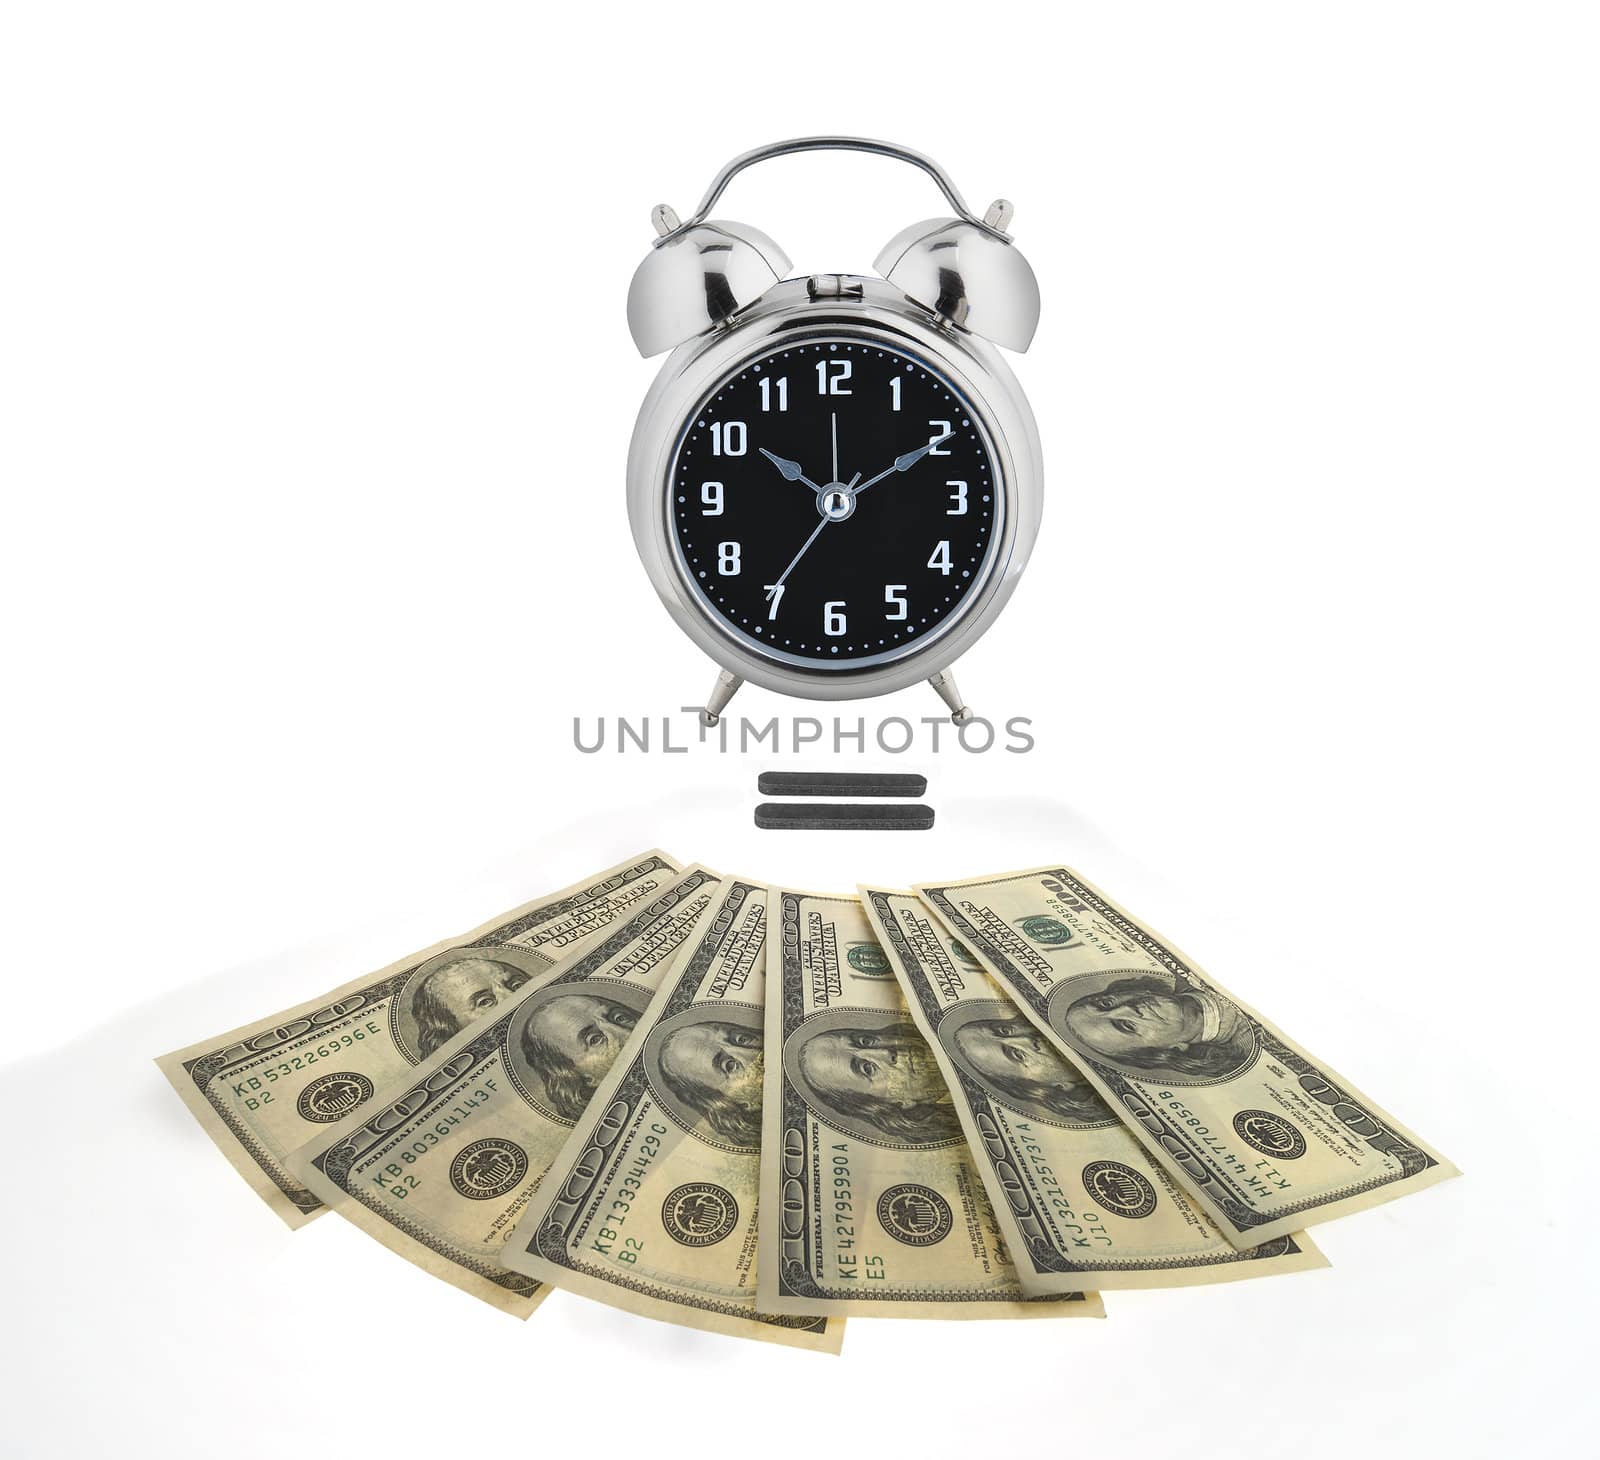 Old alarm clock over money to illustrate the concept, " time is money."